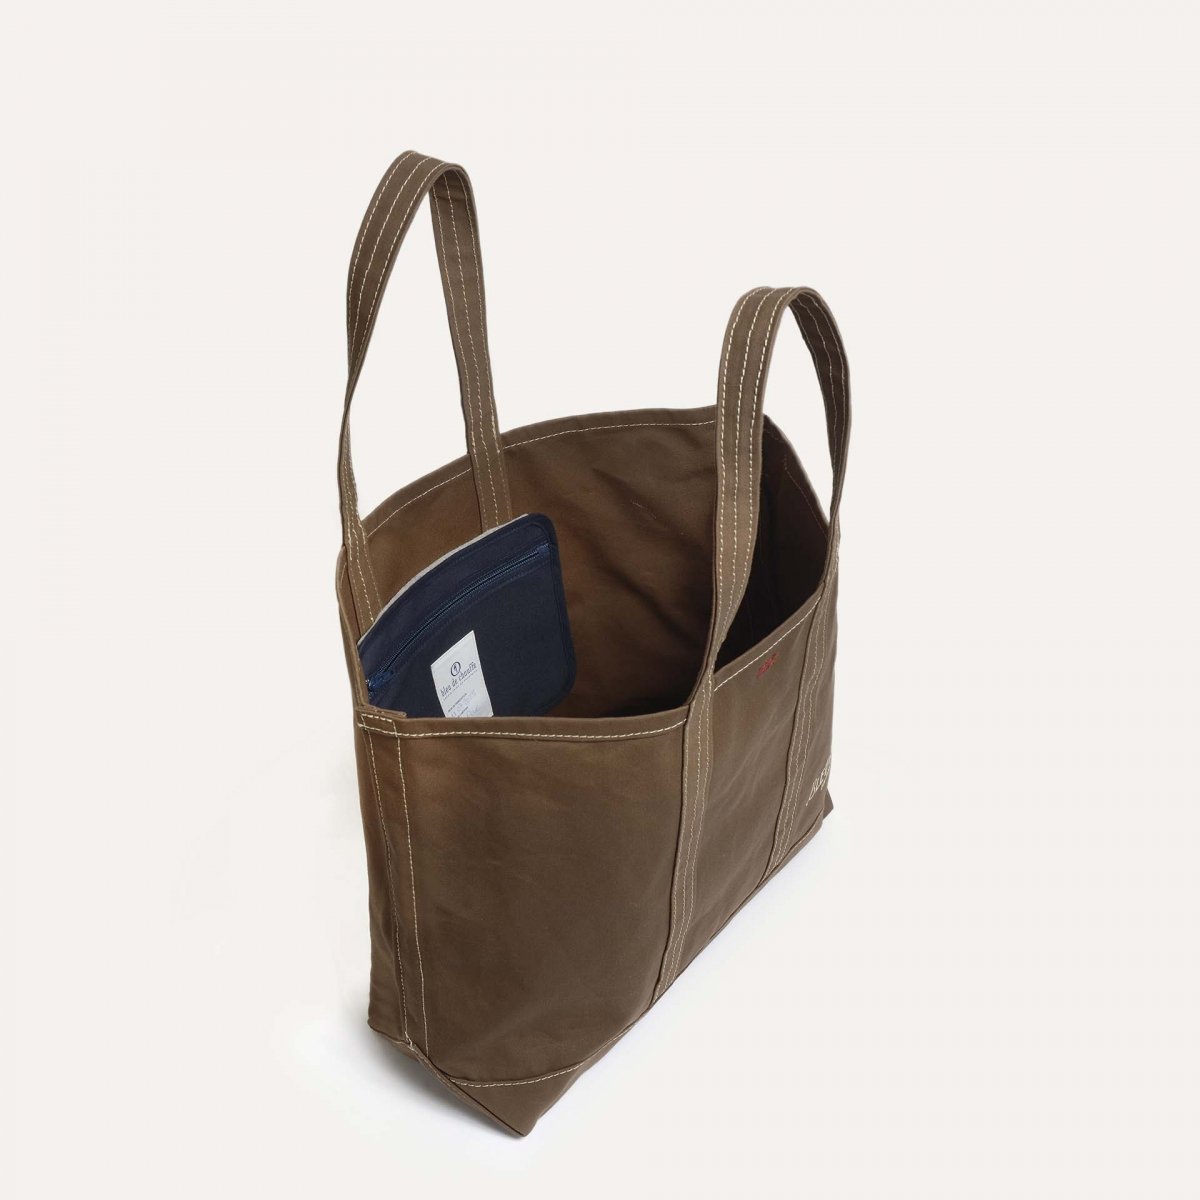 Labor Day Tote - Camel (image n°2)